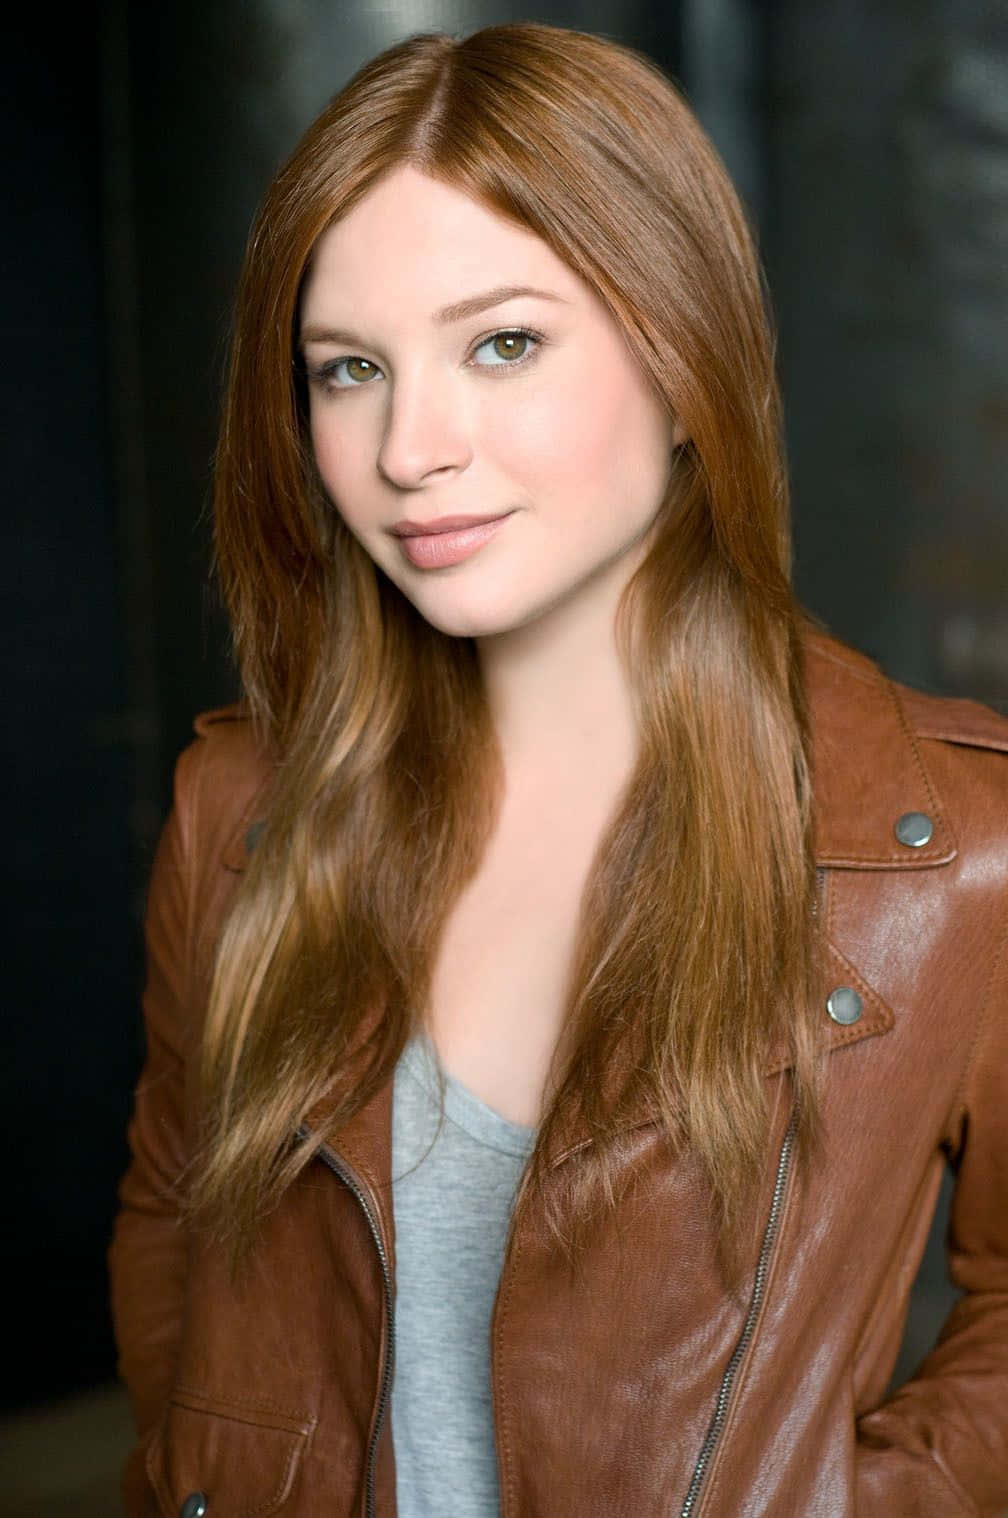 Redhead Womanin Brown Leather Jacket Wallpaper